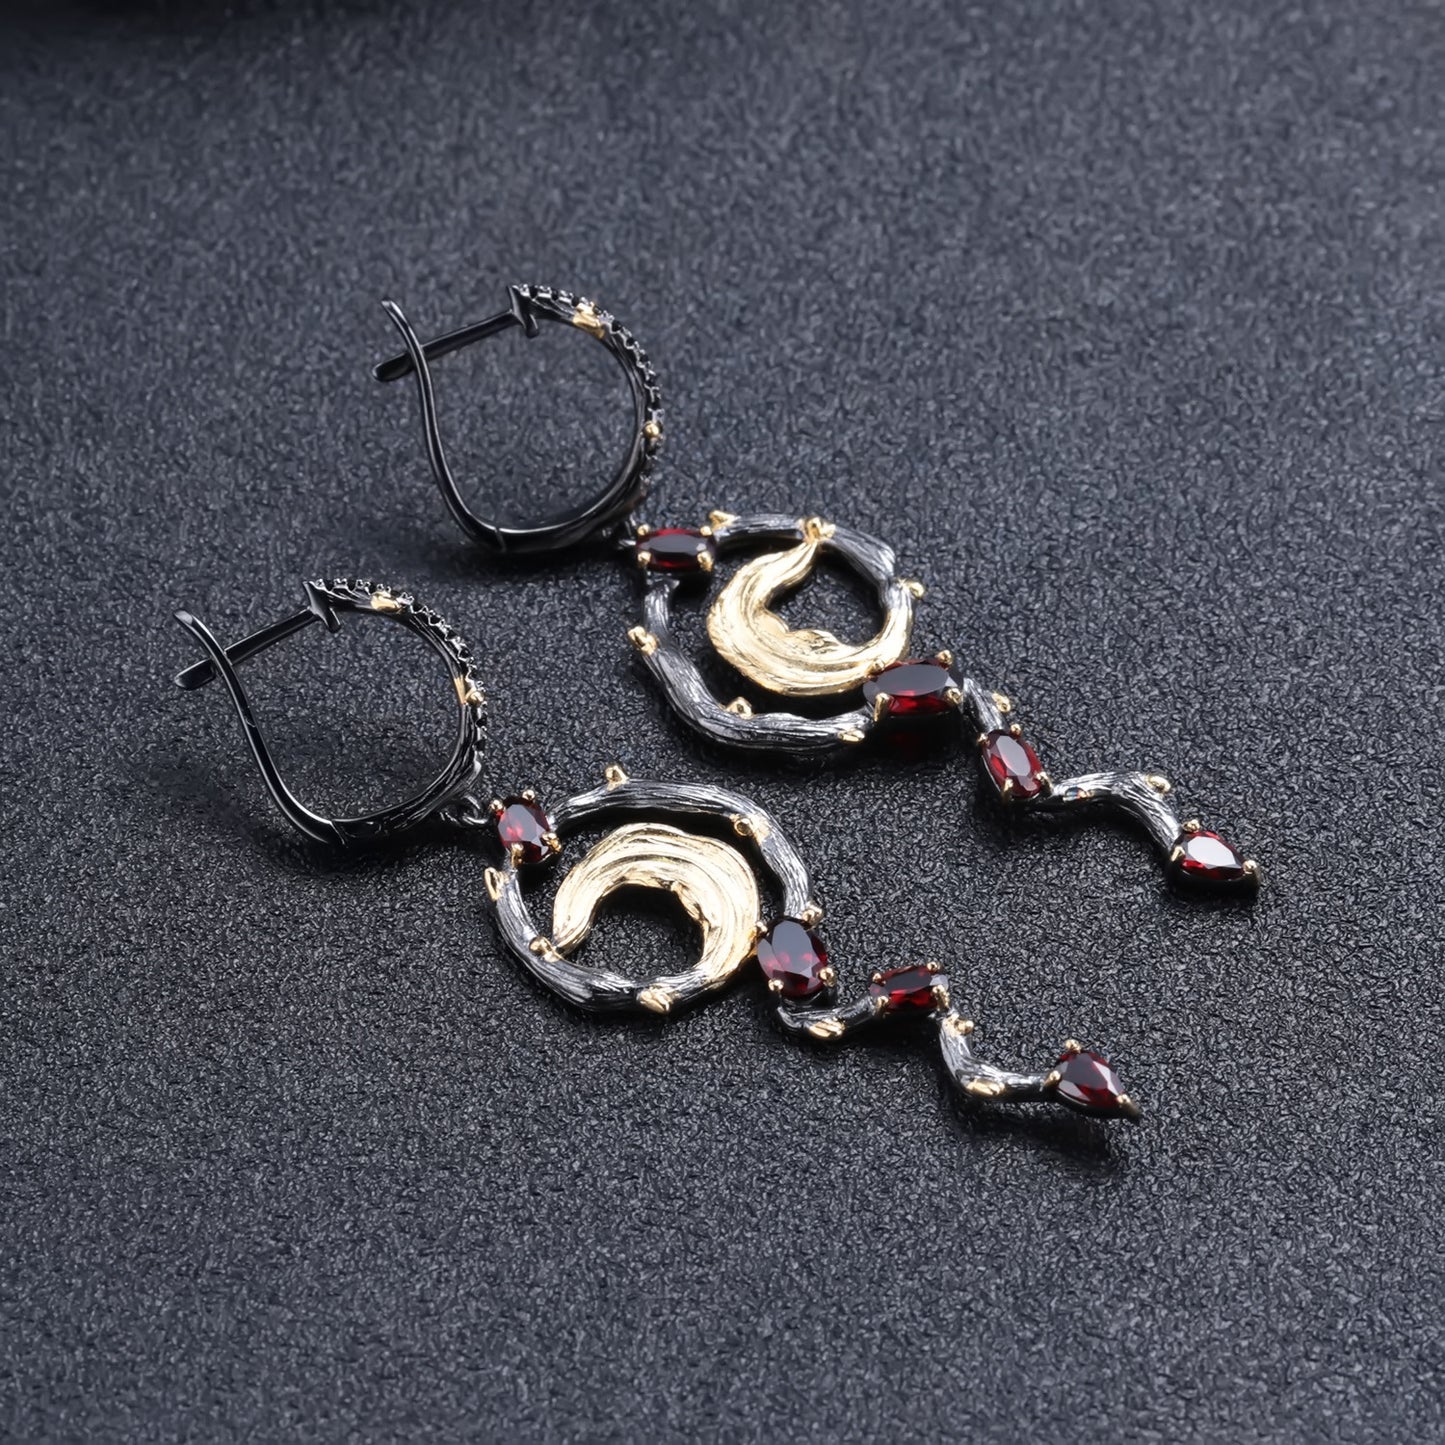 Natural Style 925 Silver Natural Color Gemstone Garnet Drop Earrings for Women